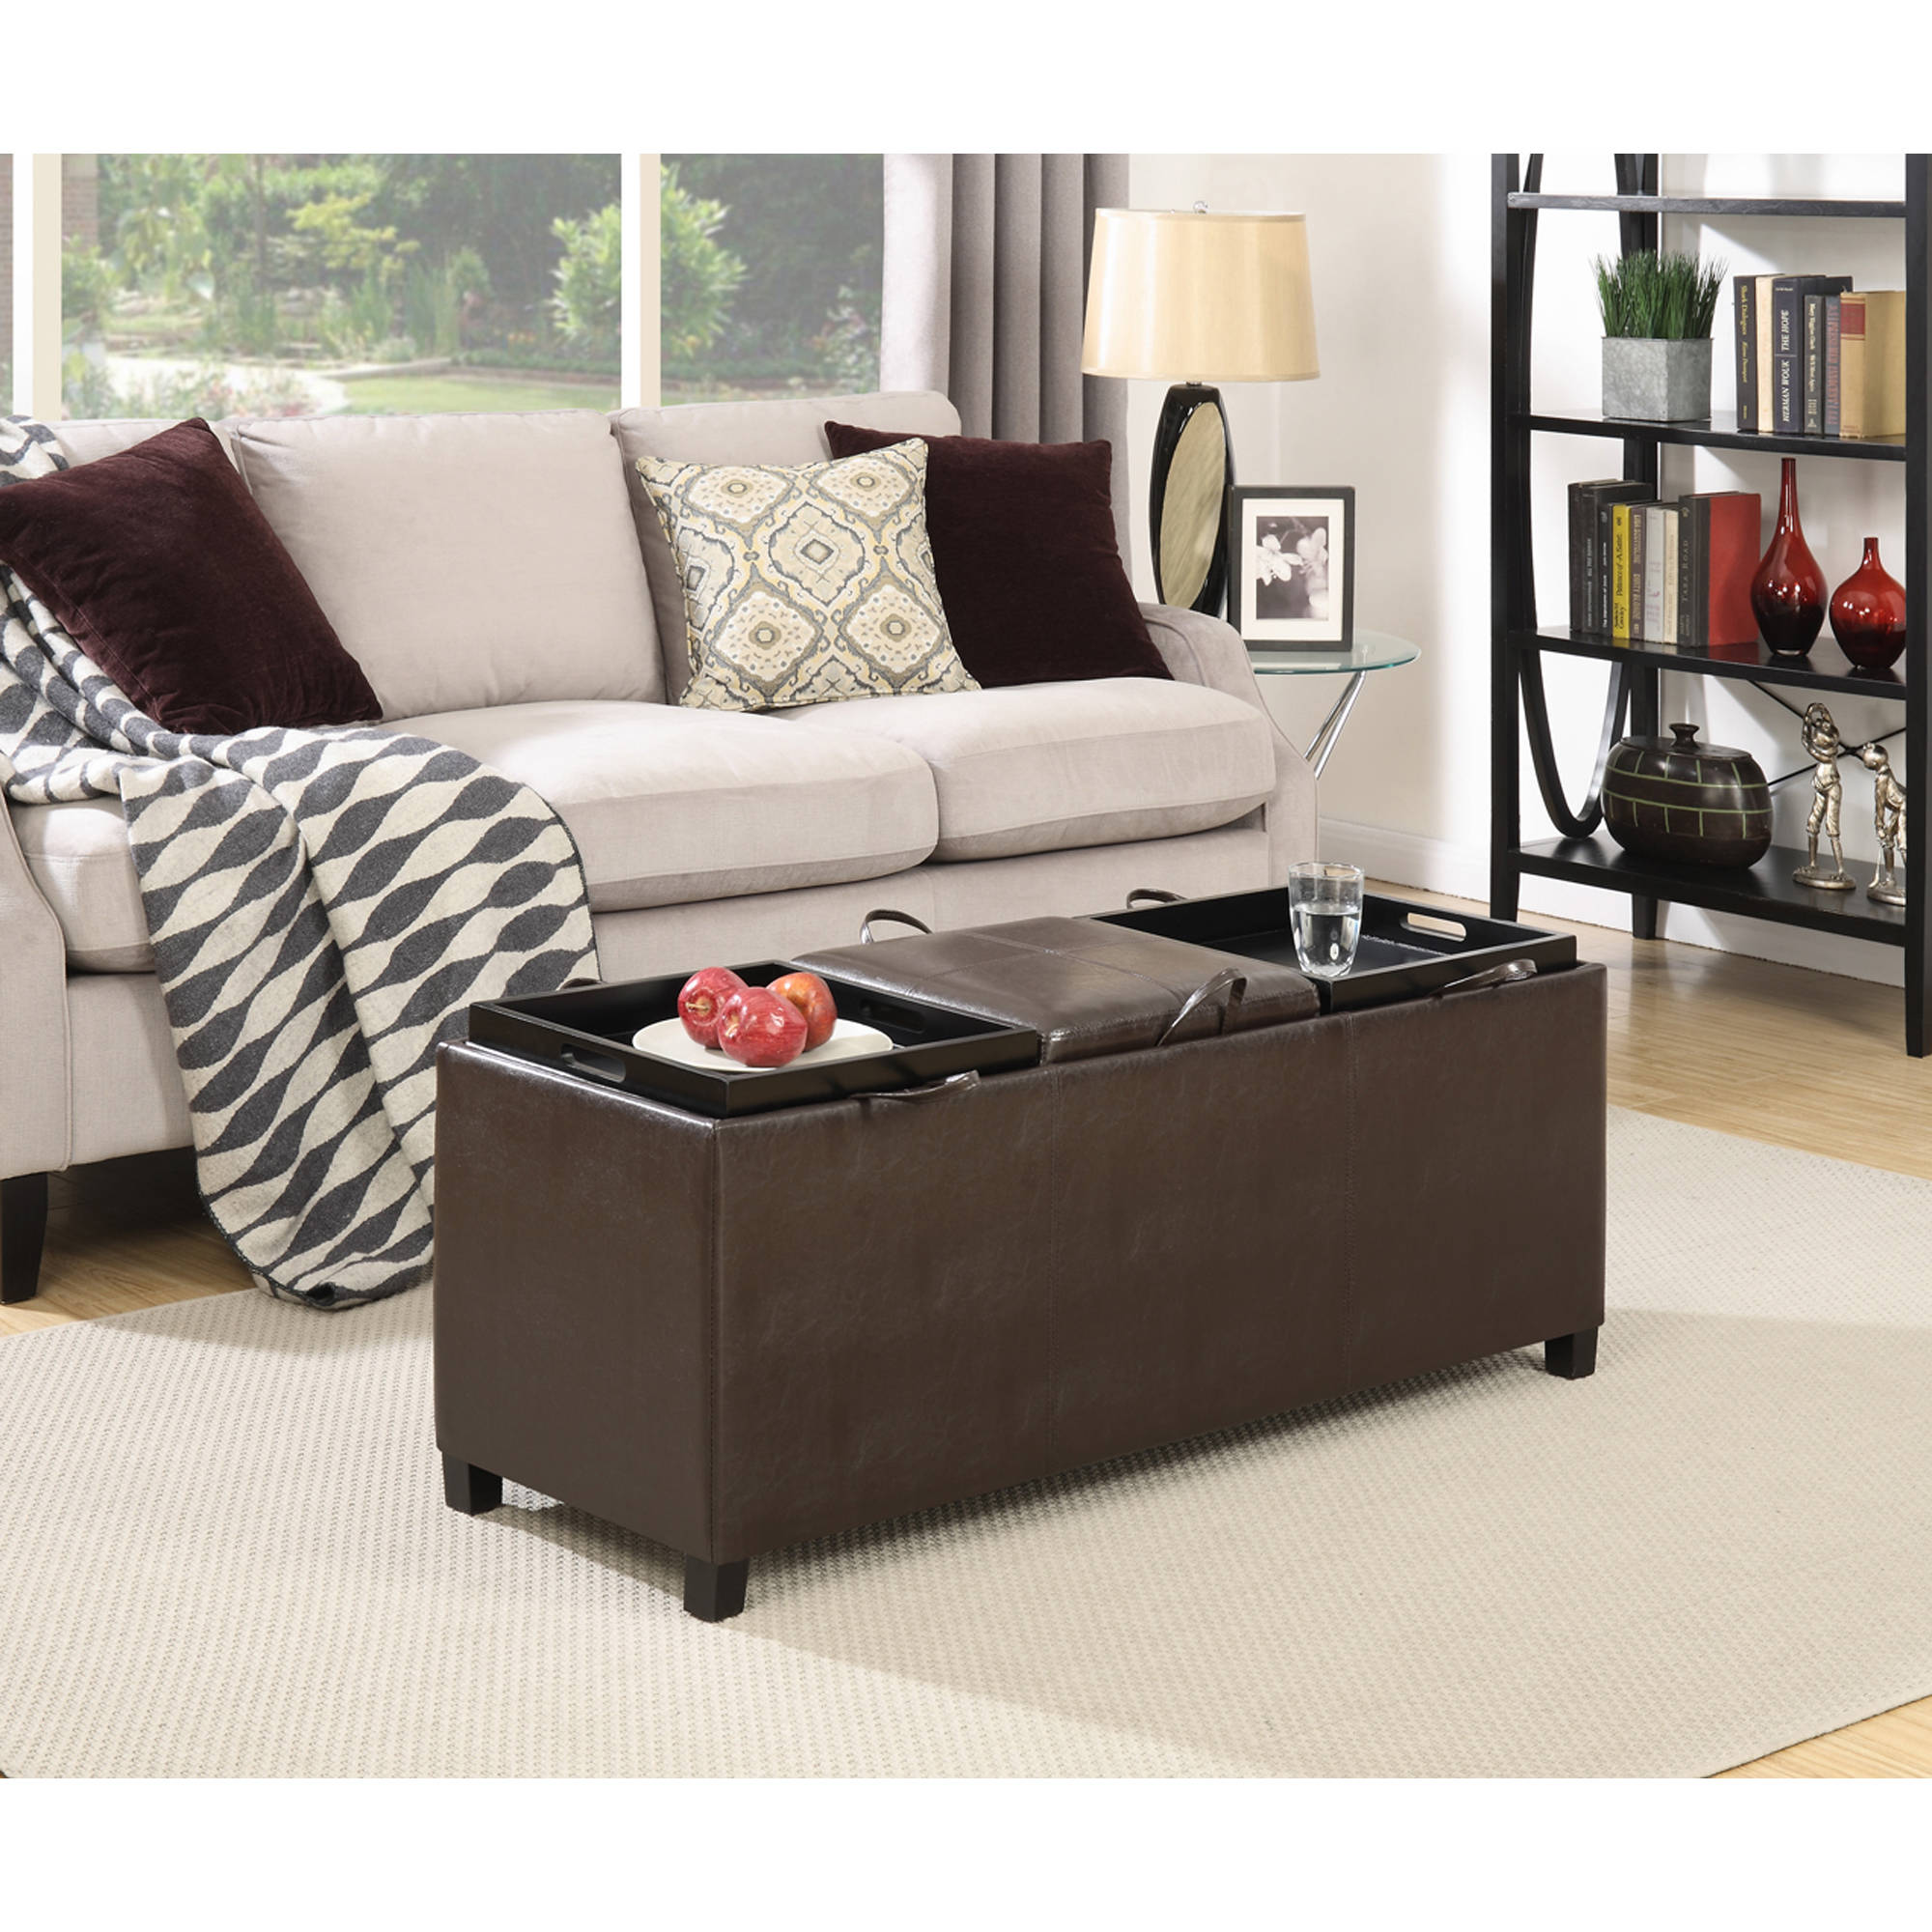 Designs4Comfort Faux Leather Storage Bench with 3 Tray Tops, Espresso - image 1 of 6